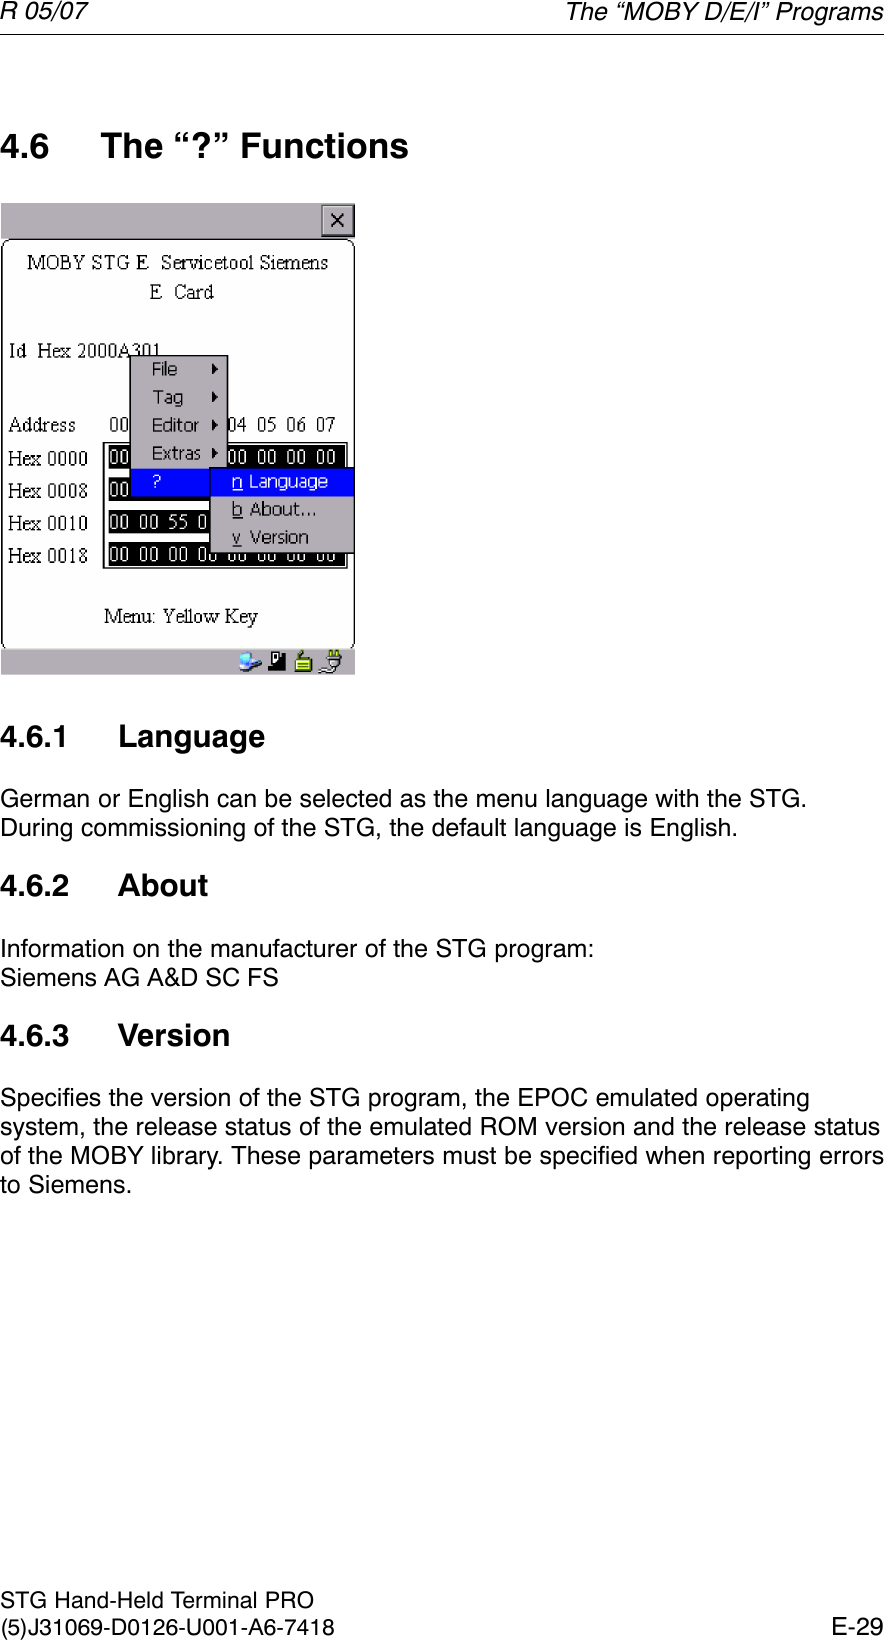 R 05/07E-29STG Hand-Held Terminal PRO(5)J31069-D0126-U001-A6-74184.6 The “?” Functions4.6.1 LanguageGerman or English can be selected as the menu language with the STG.During commissioning of the STG, the default language is English.4.6.2 AboutInformation on the manufacturer of the STG program: Siemens AG A&amp;D SC FS4.6.3 VersionSpecifies the version of the STG program, the EPOC emulated operatingsystem, the release status of the emulated ROM version and the release statusof the MOBY library. These parameters must be specified when reporting errorsto Siemens.The “MOBY D/E/I” Programs